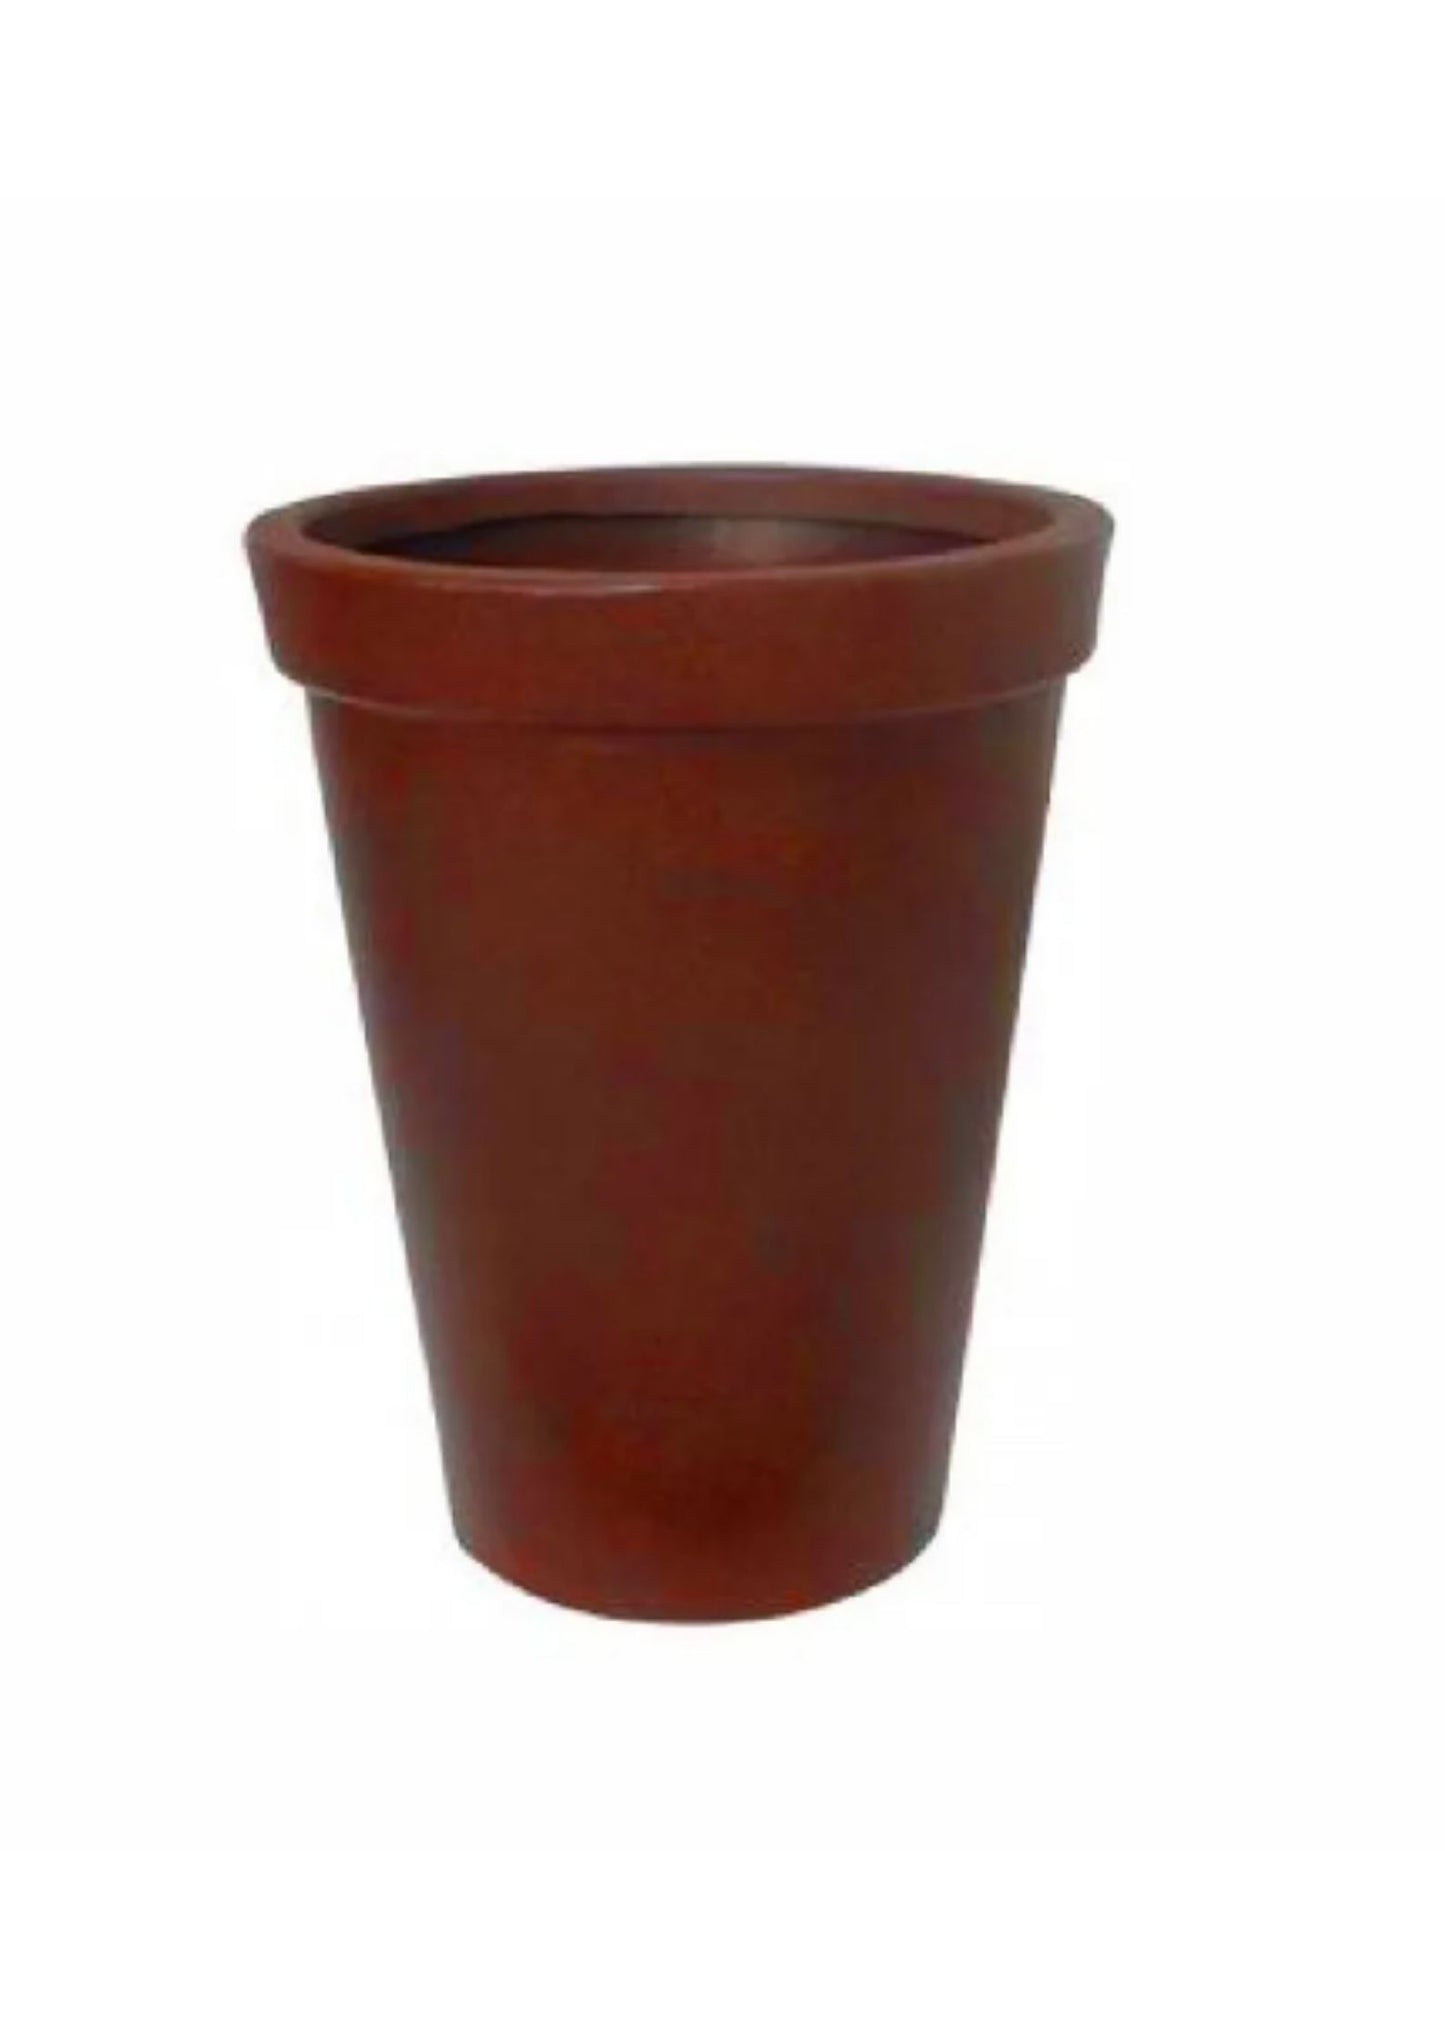 Athens conical flower pot 66 - Hoops 